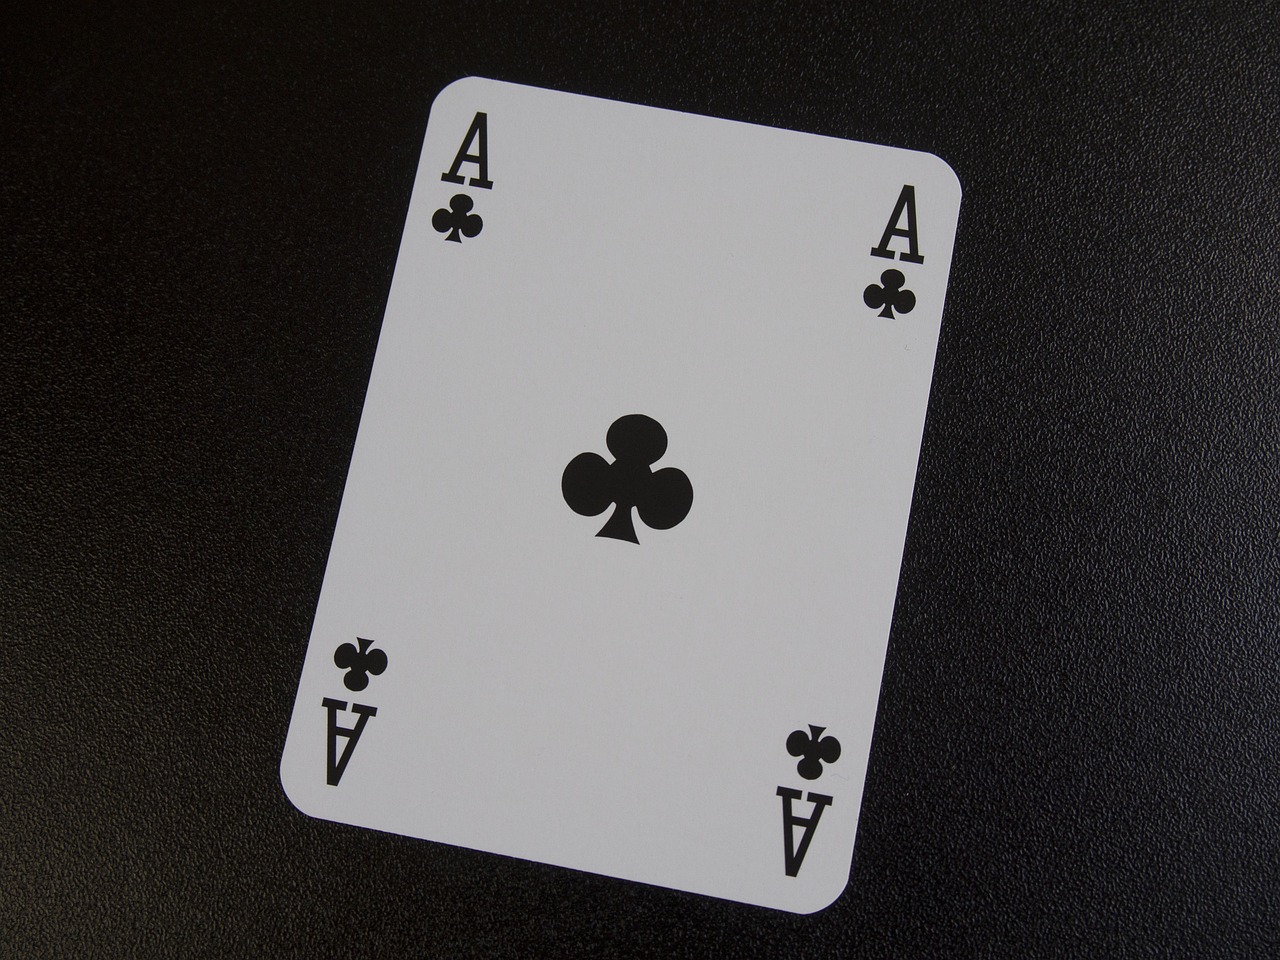 How The Poker Limp Works And Why You Should Avoid Using It